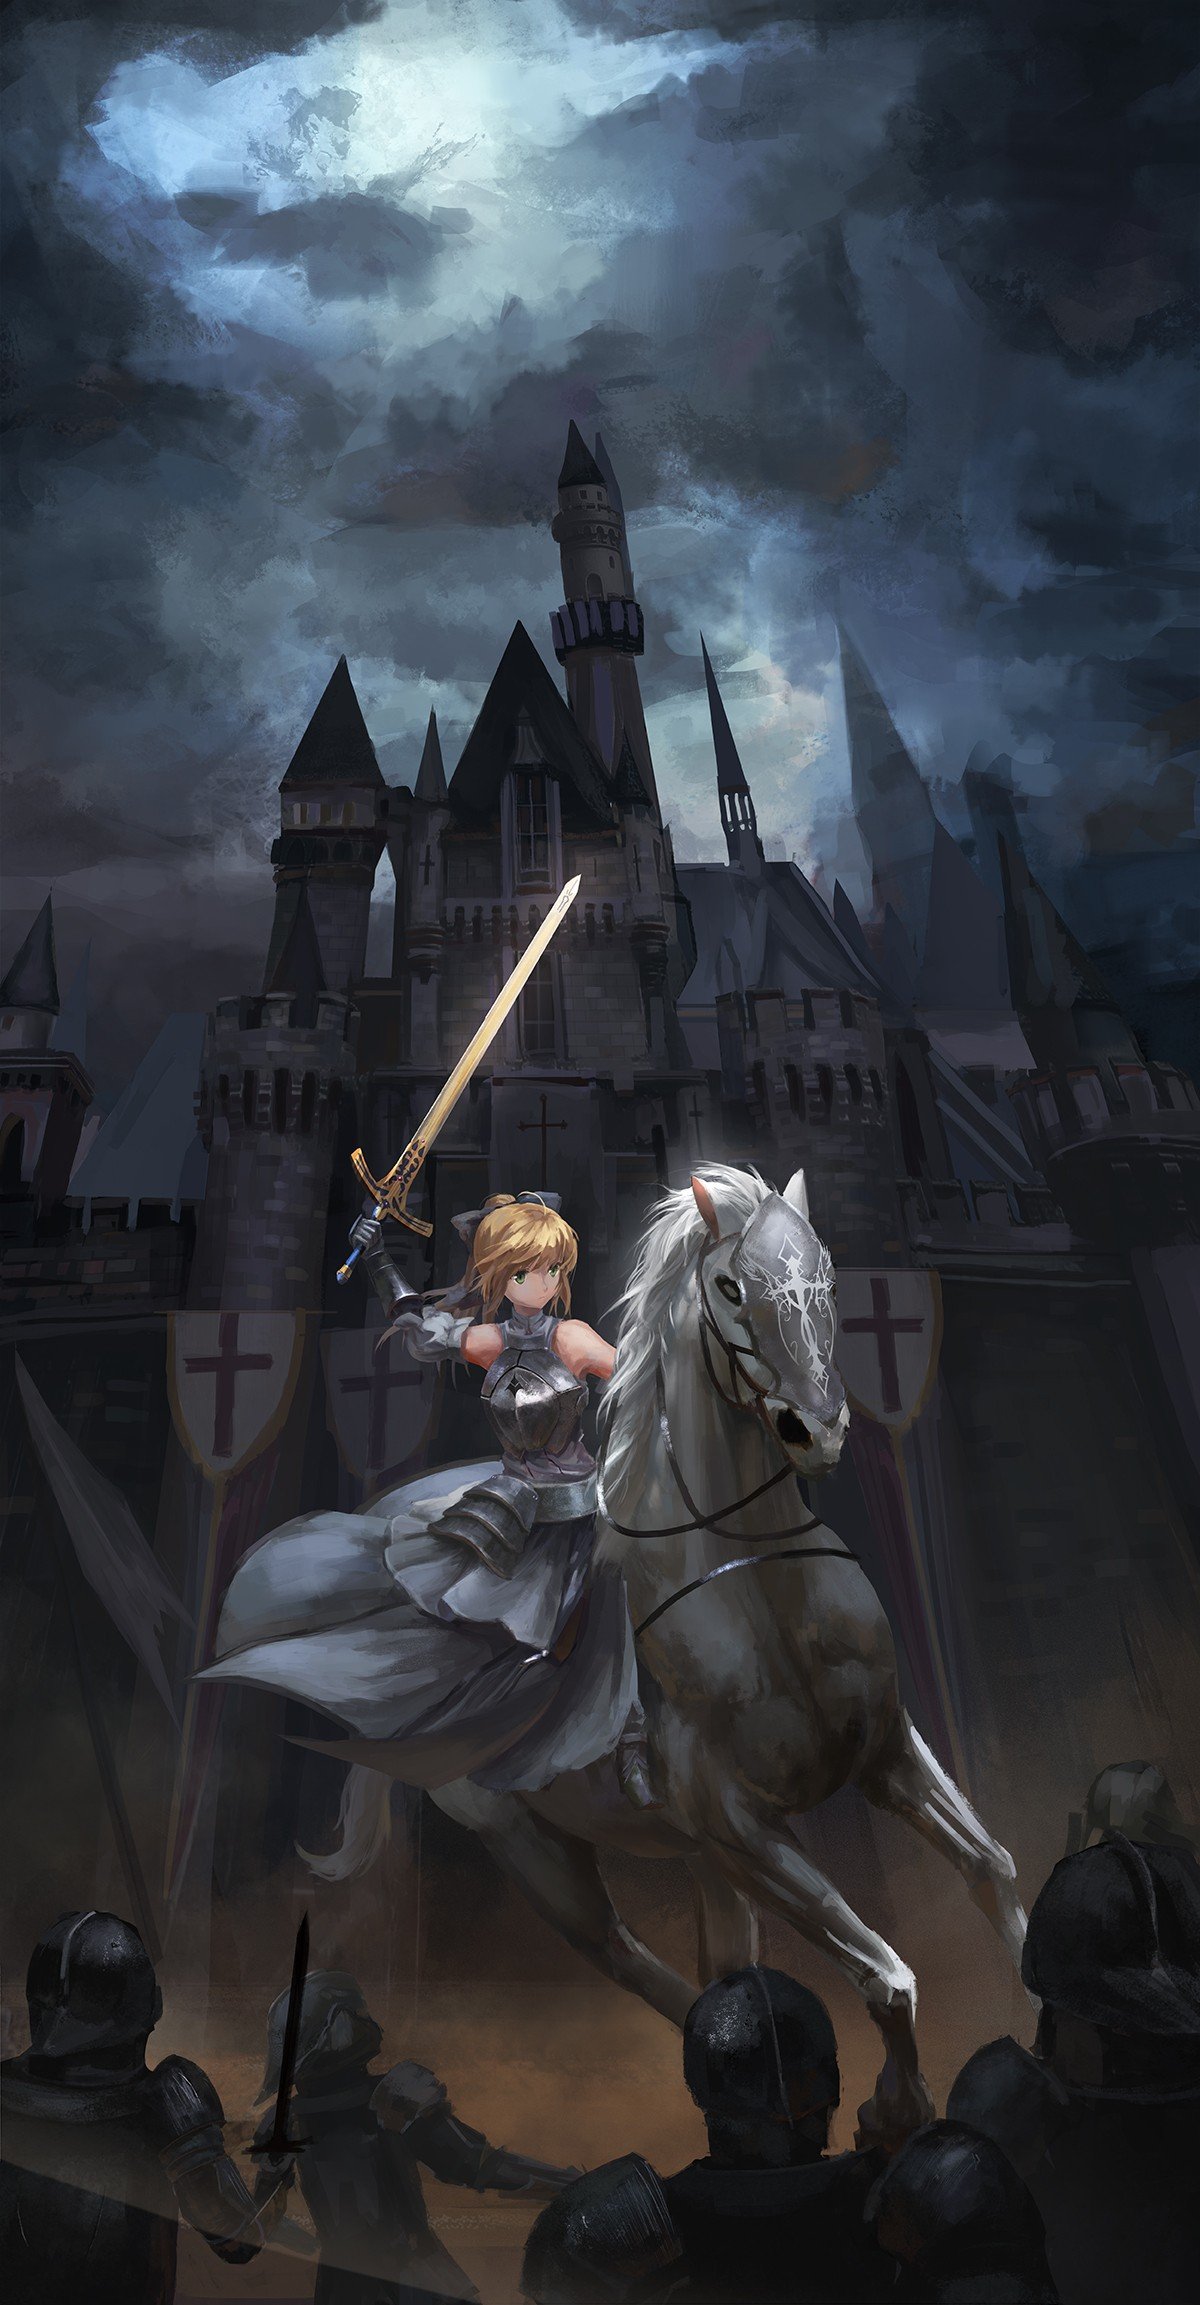 blonde, Green eyes, Anime, Anime girls, Fate Grand Order, Fate Stay Night, Fate Unlimited Codes, Saber, Saber Lily, Armor, Sword, Weapon, Castle Wallpaper